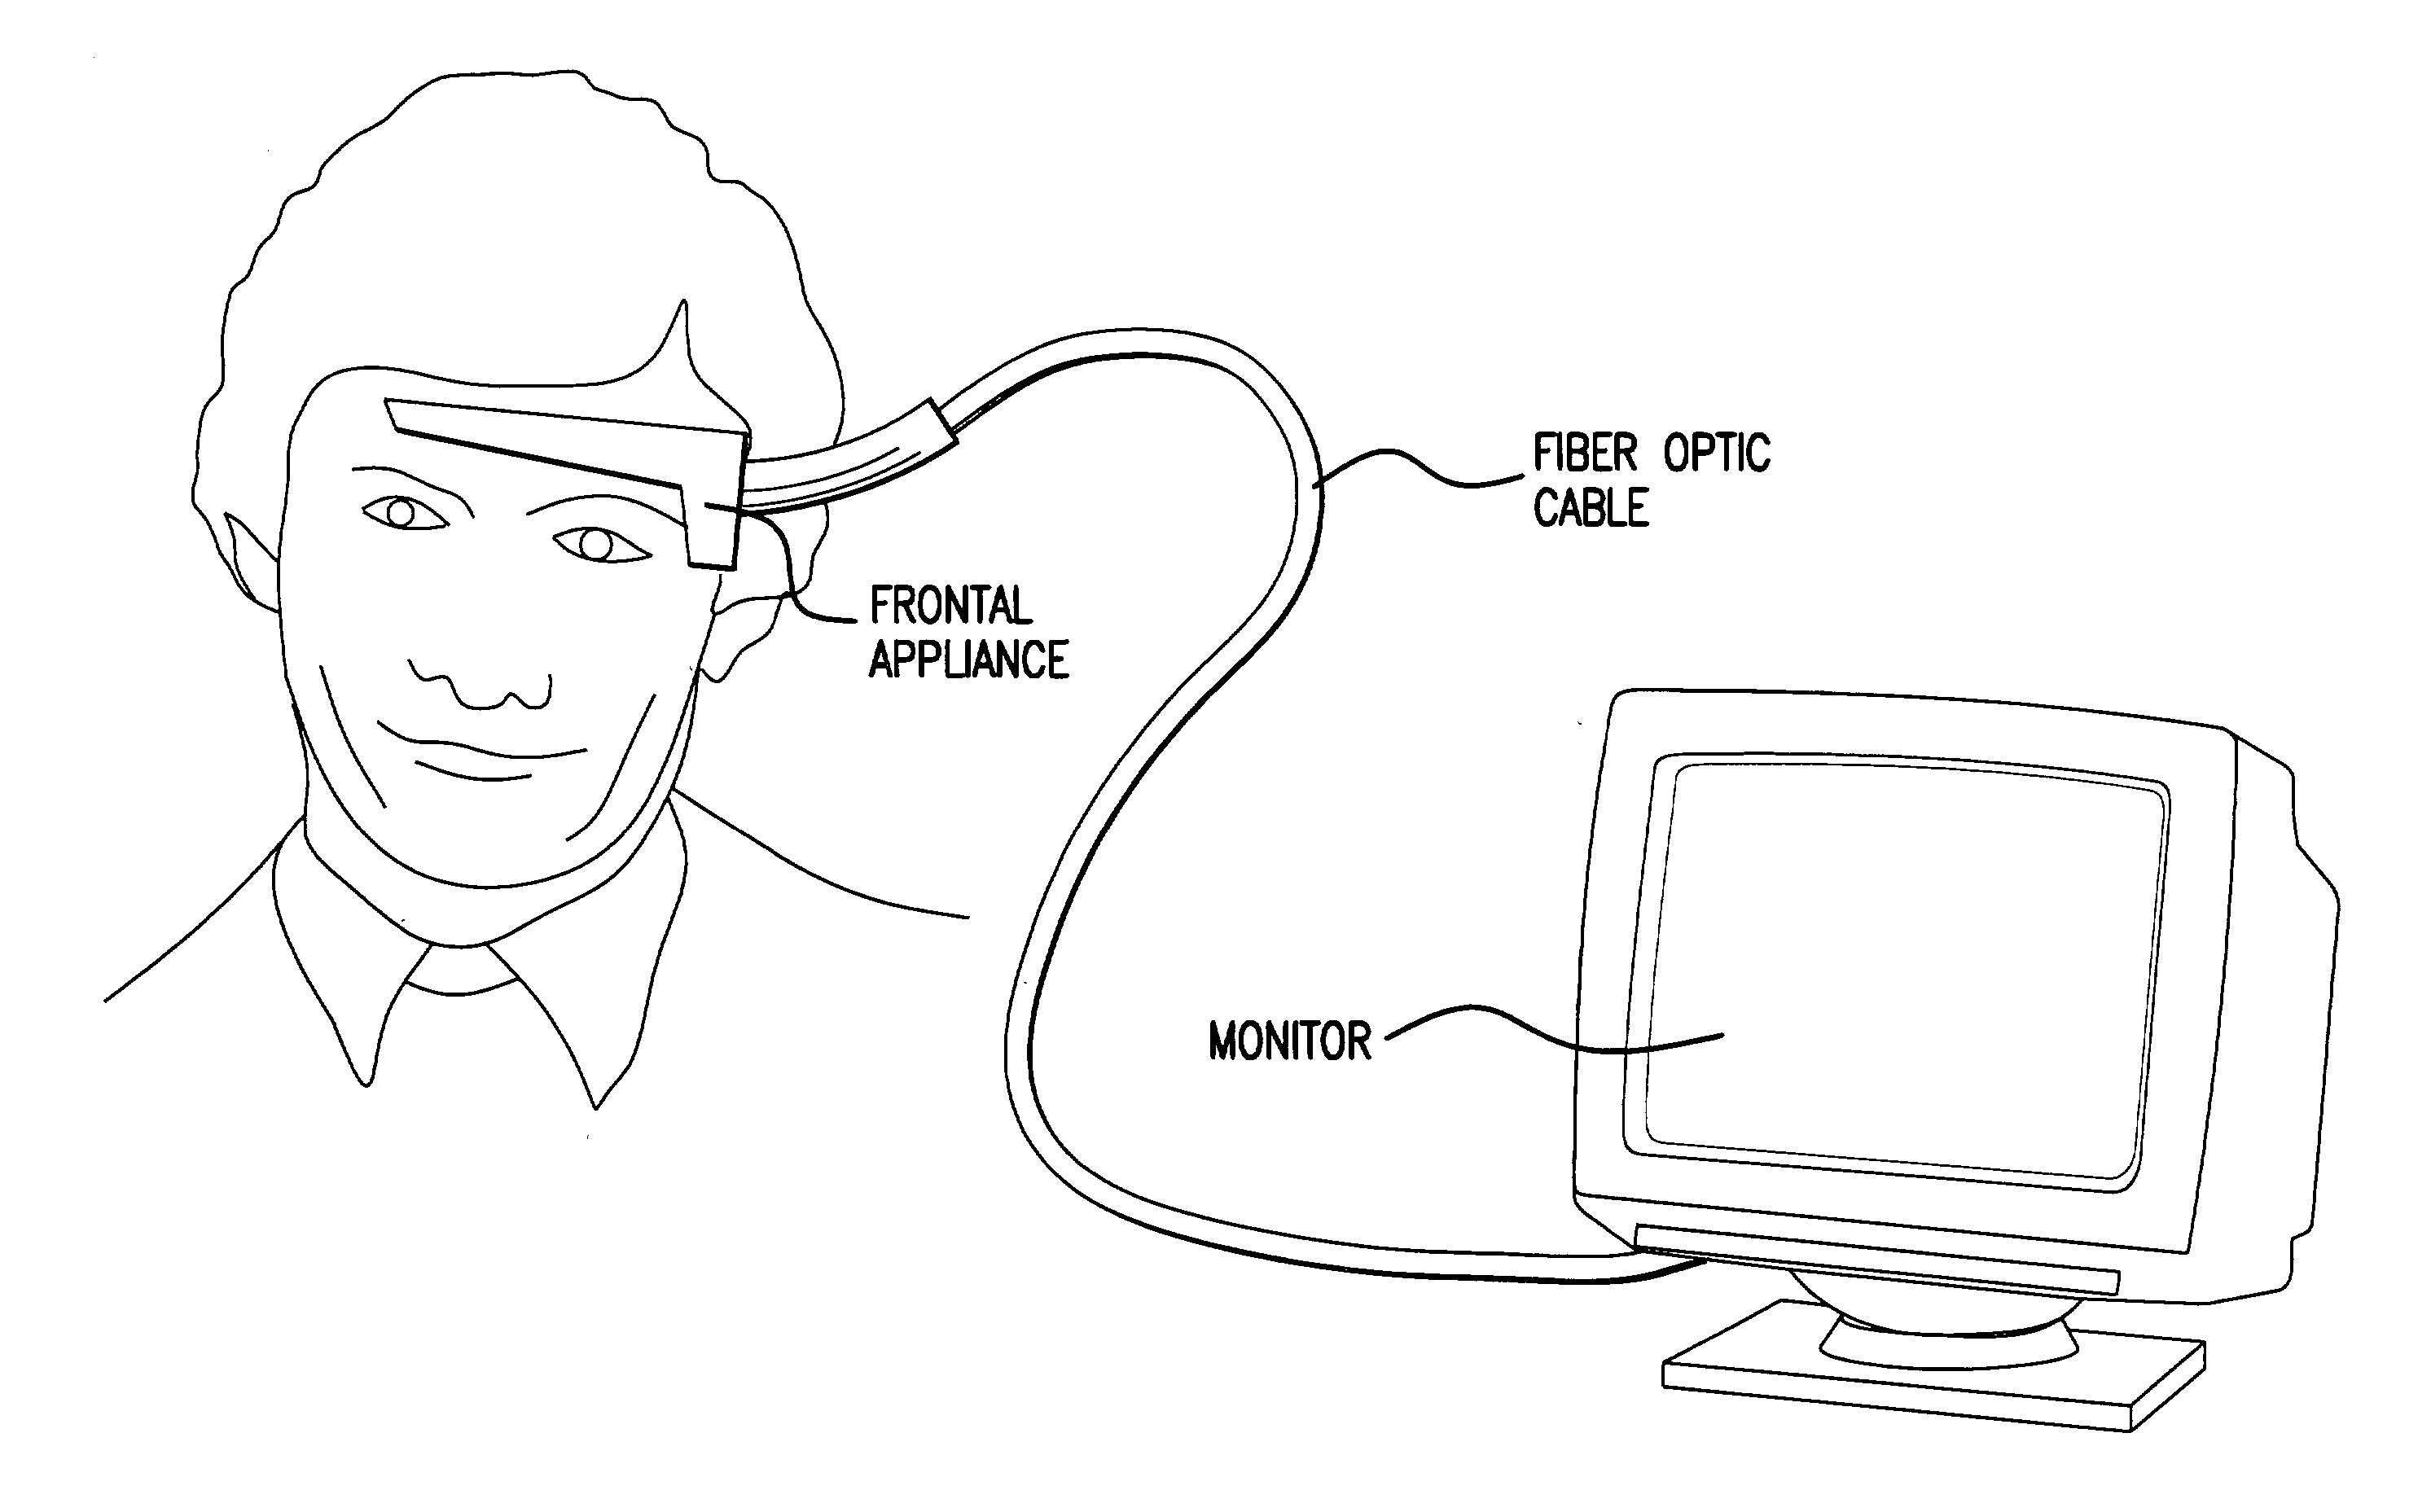 Fiber optic power source for an electroencephalograph acquisition apparatus